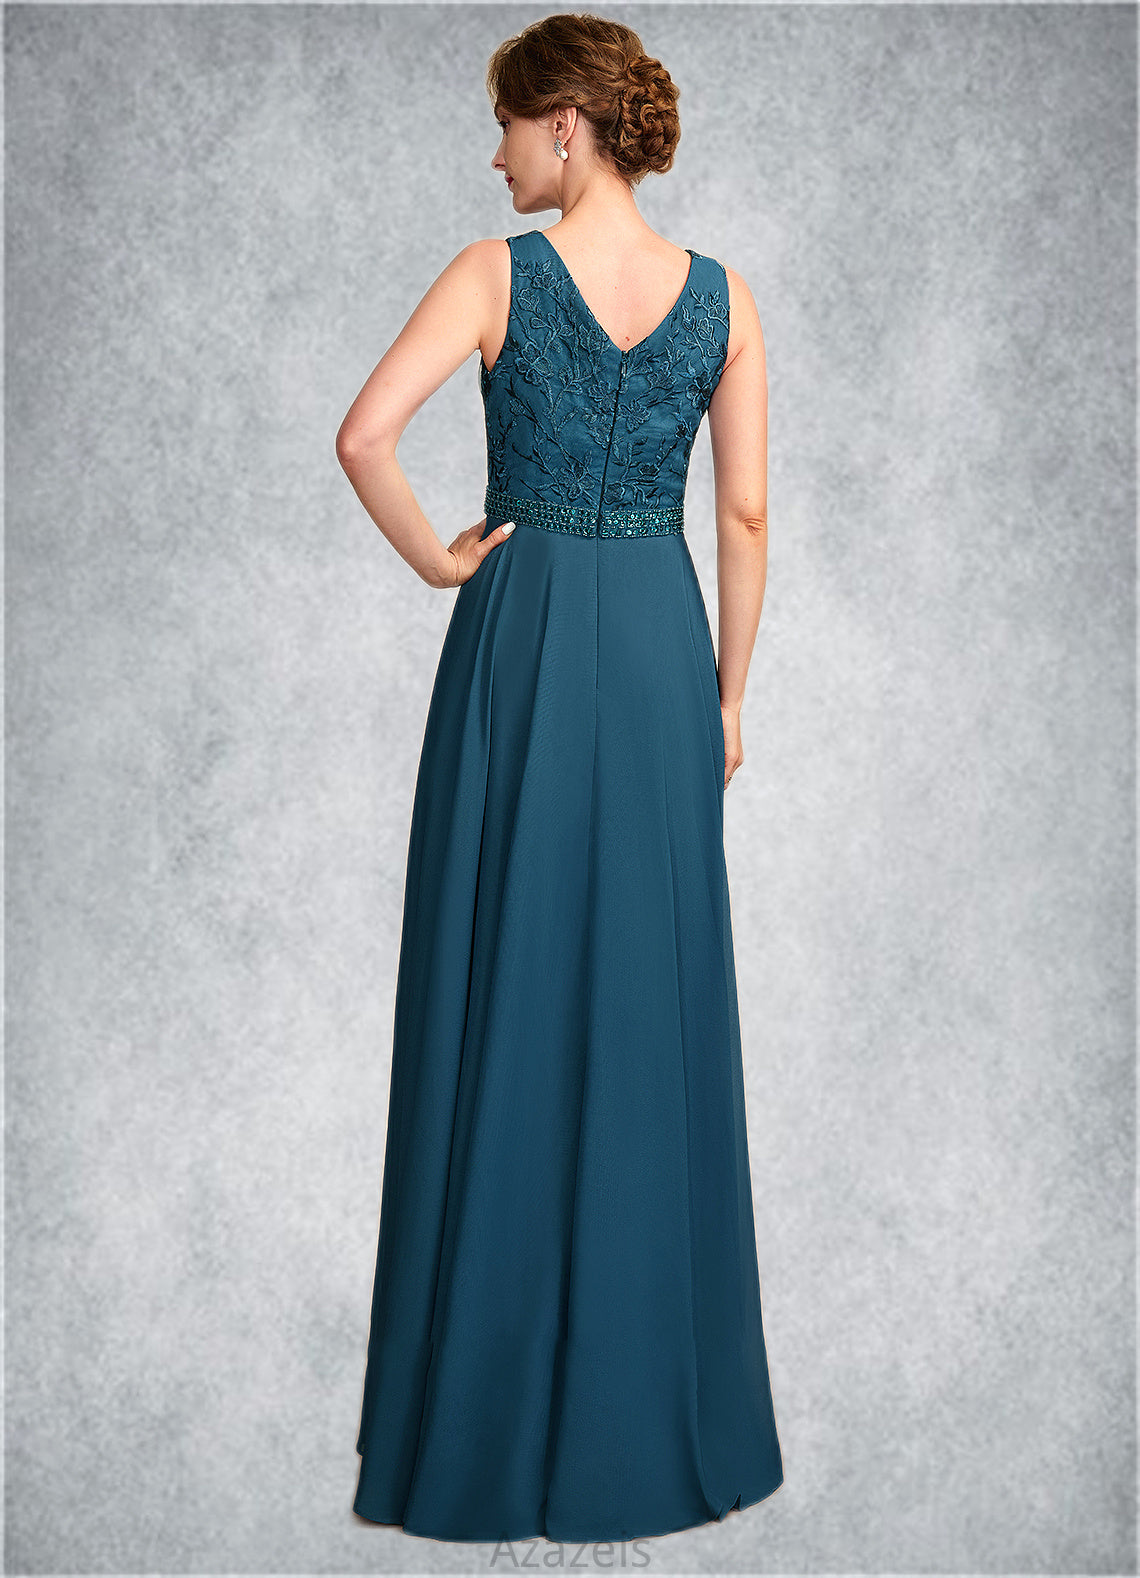 Vanessa A-Line V-neck Floor-Length Chiffon Lace Mother of the Bride Dress With Beading Sequins DF126P0015004